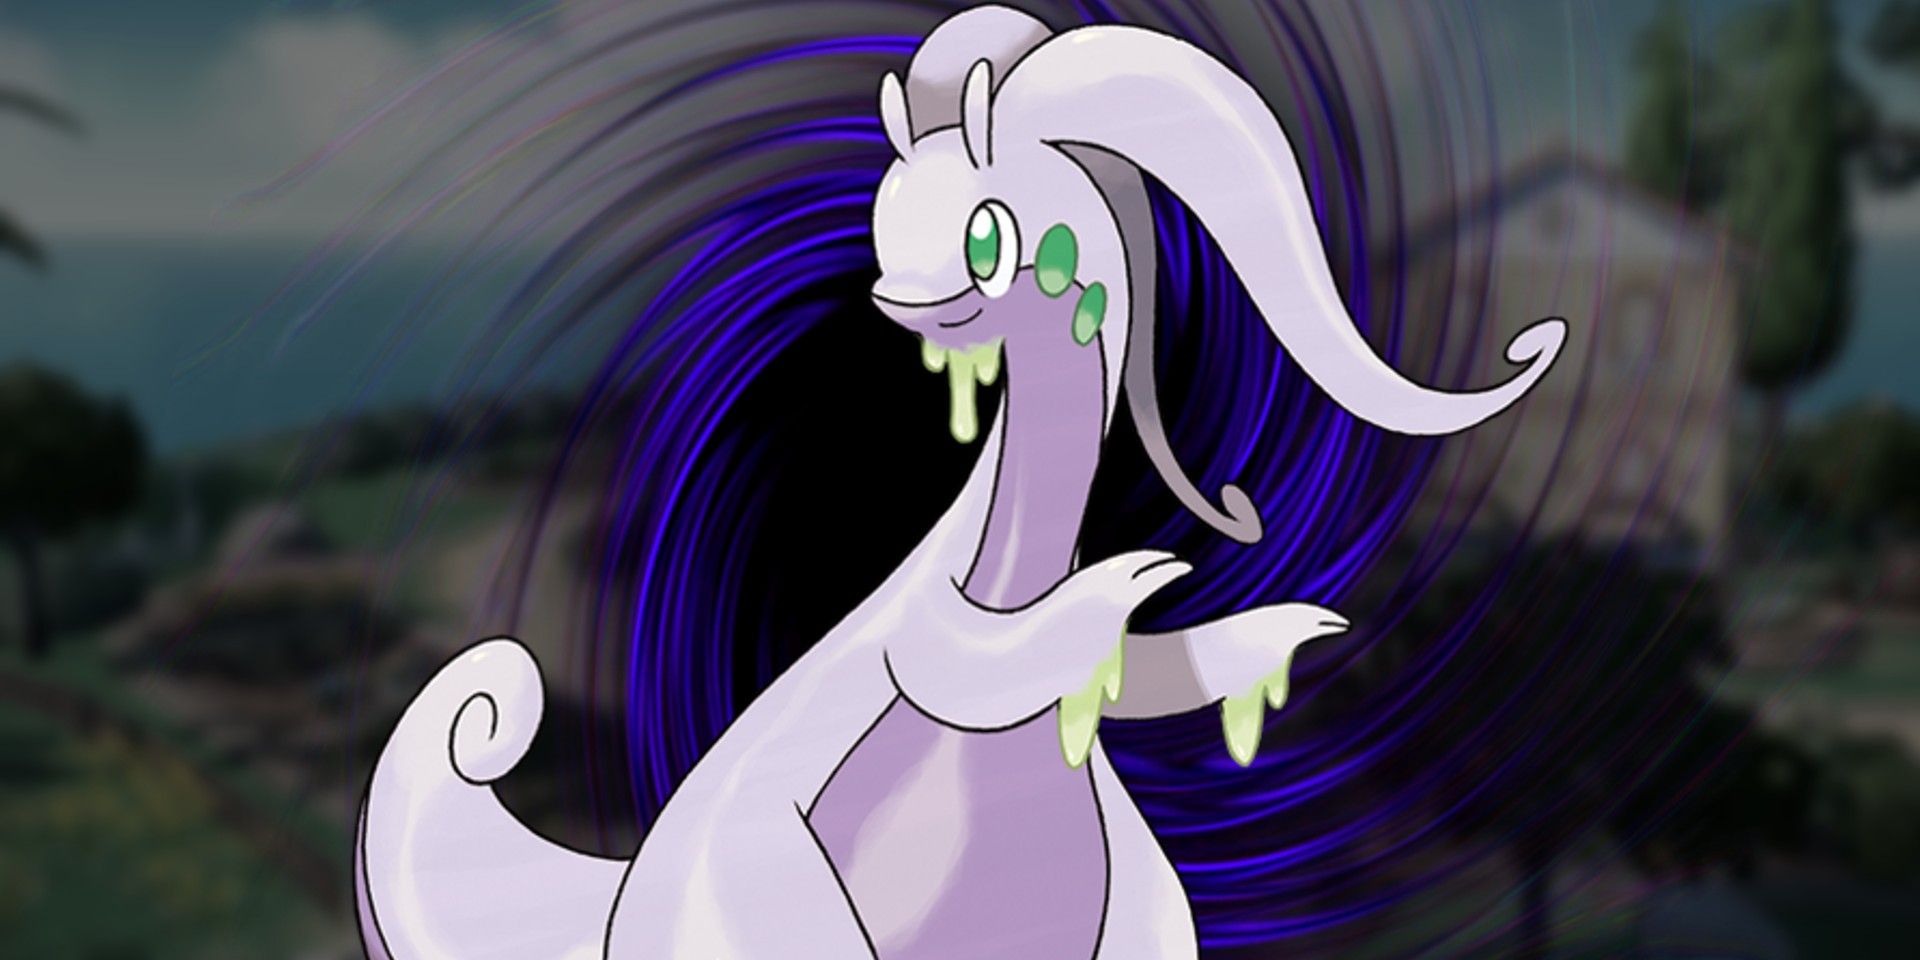 Pokemon Unite Goodra: Release date, revealed movesets, and more